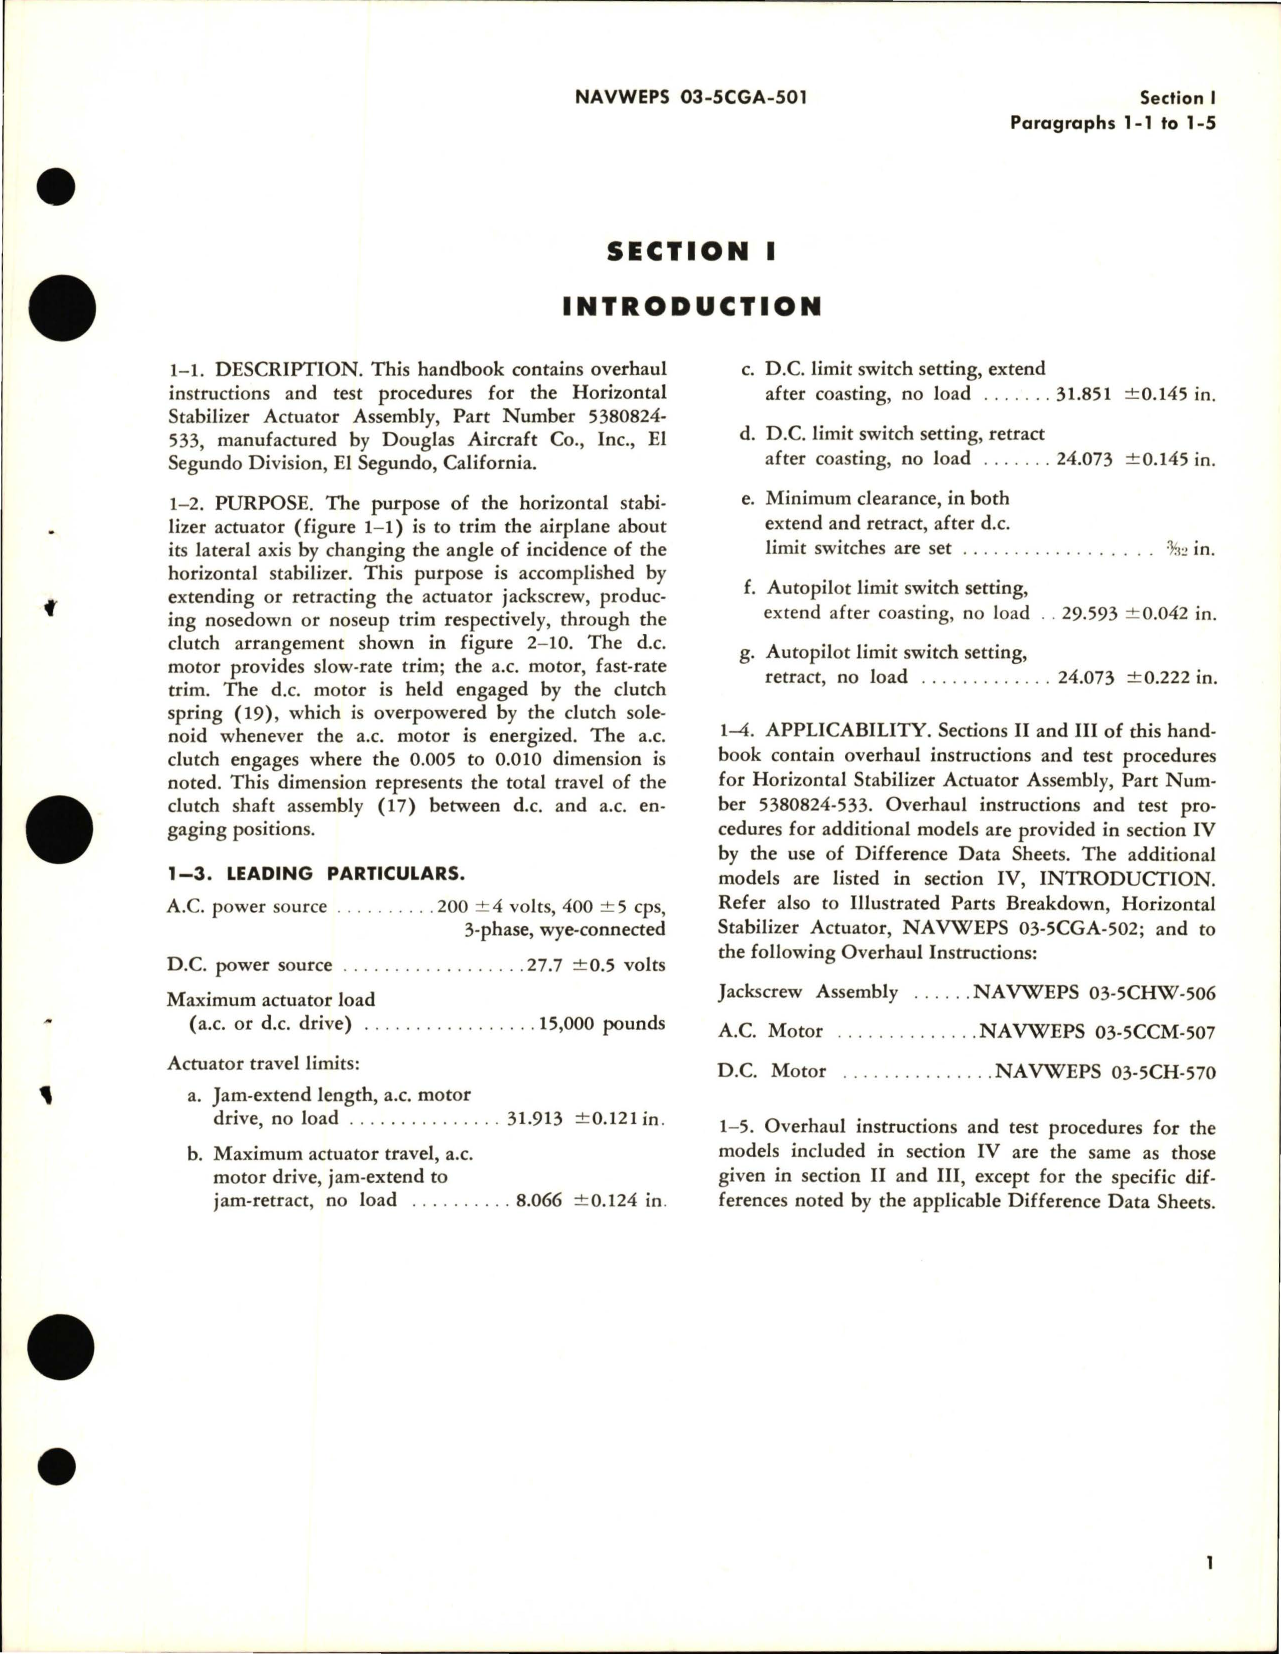 Sample page 7 from AirCorps Library document: Overhaul Instructions for Horizontal Stabilizer Actuator 